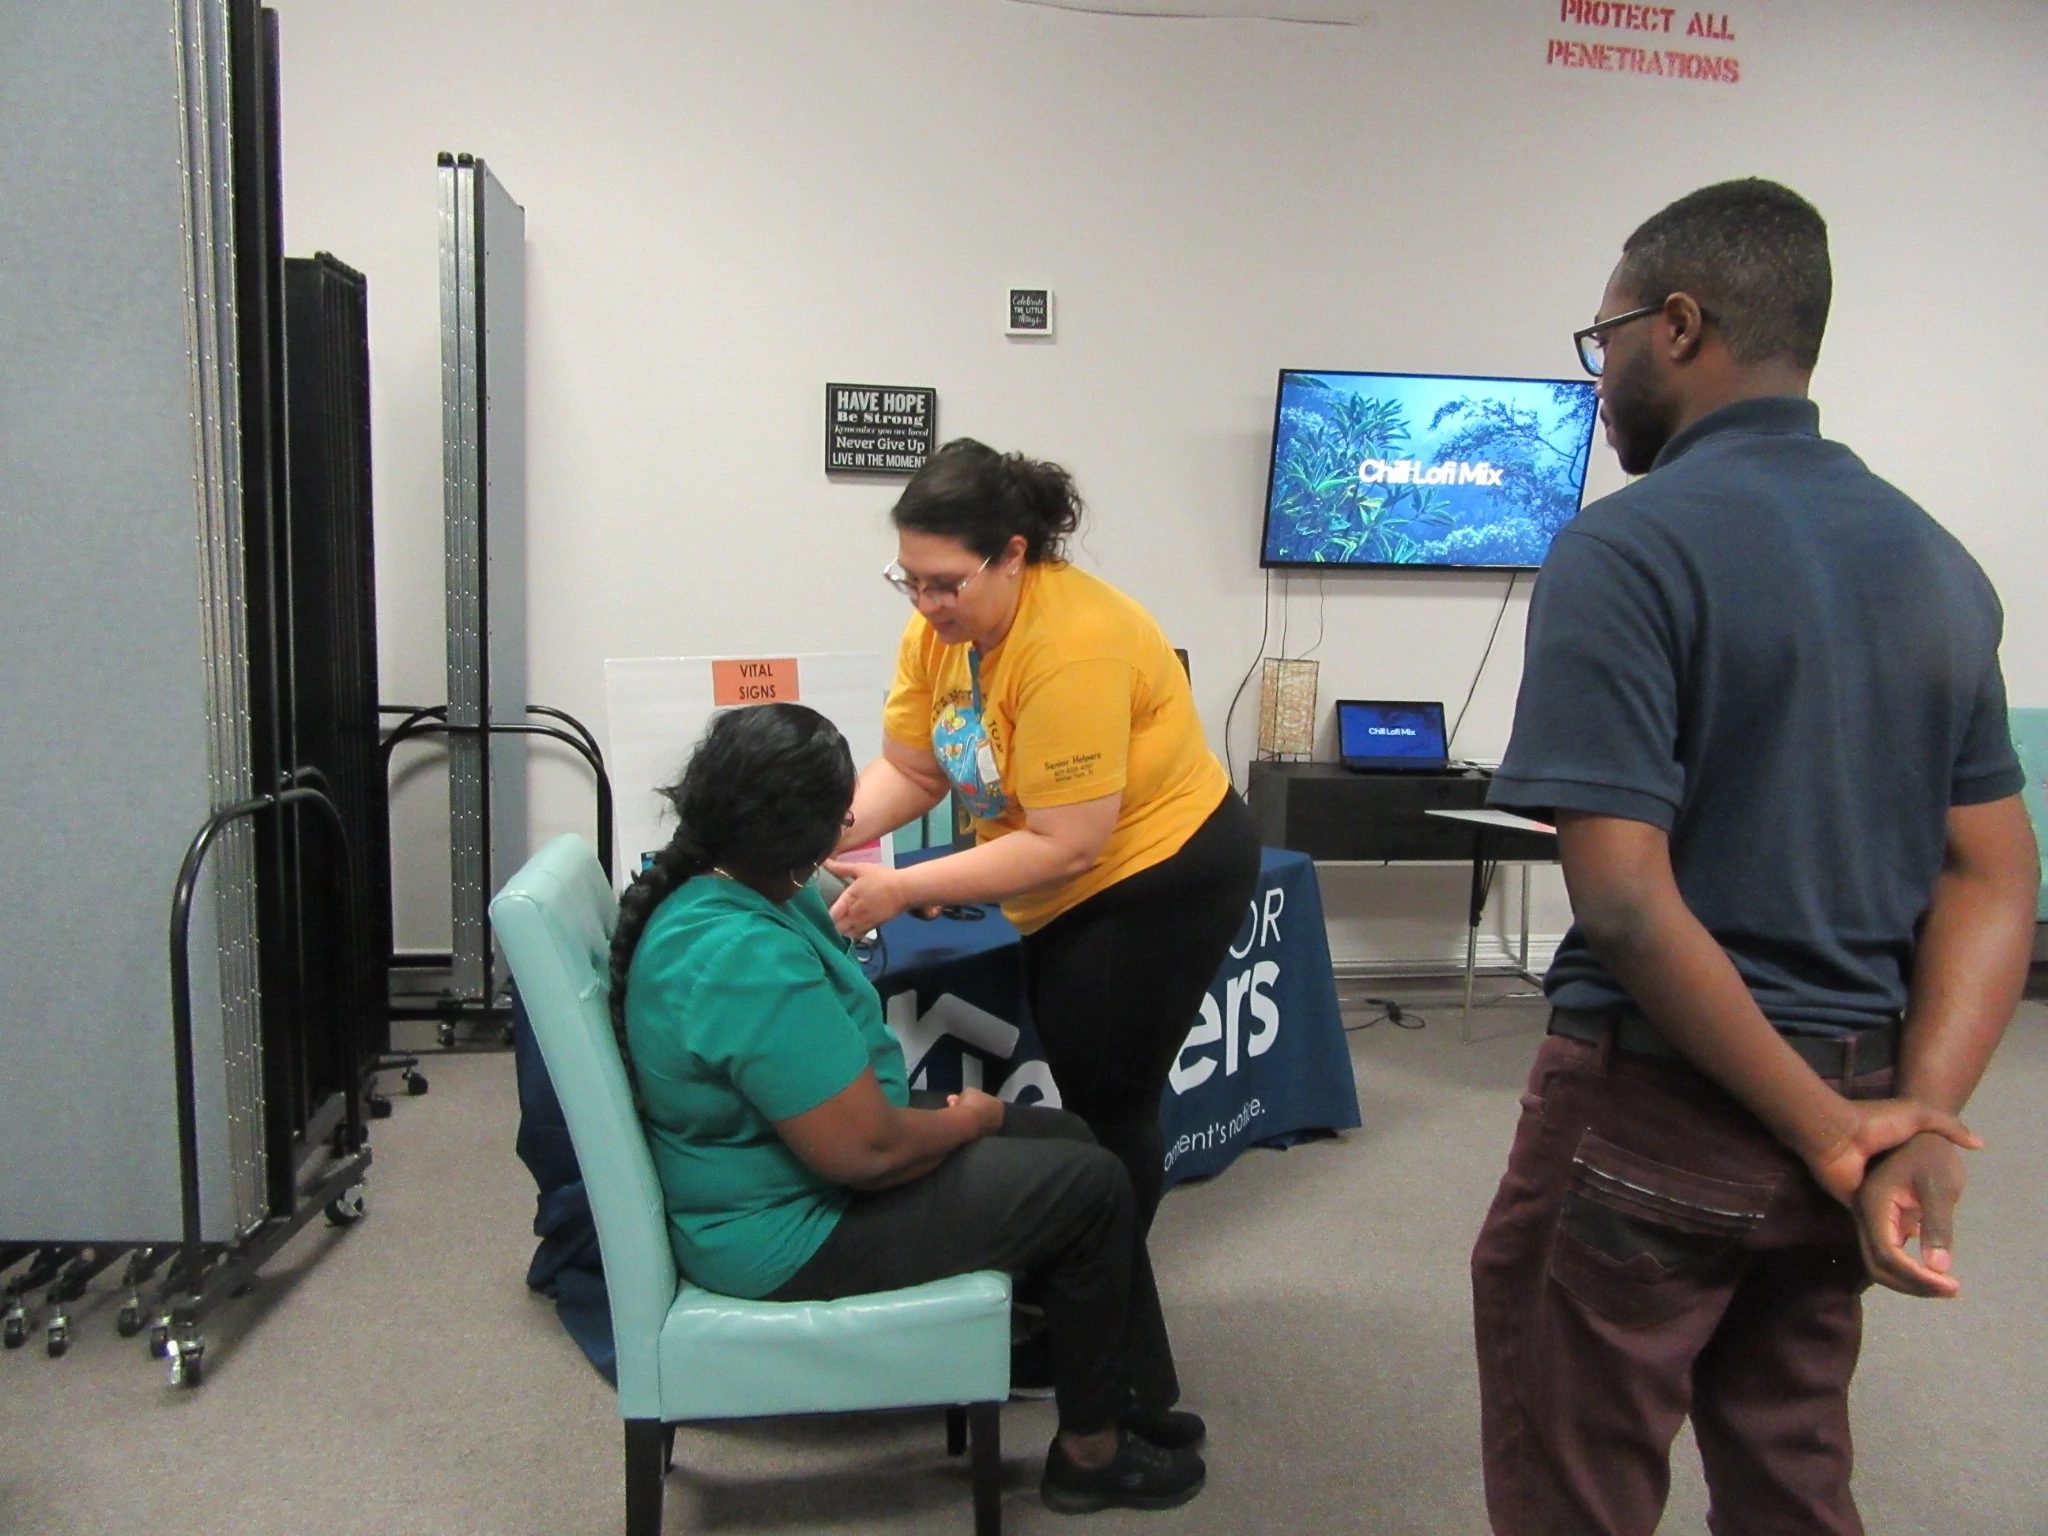 Caregivers review blood pressure skills with Director of Nursing.